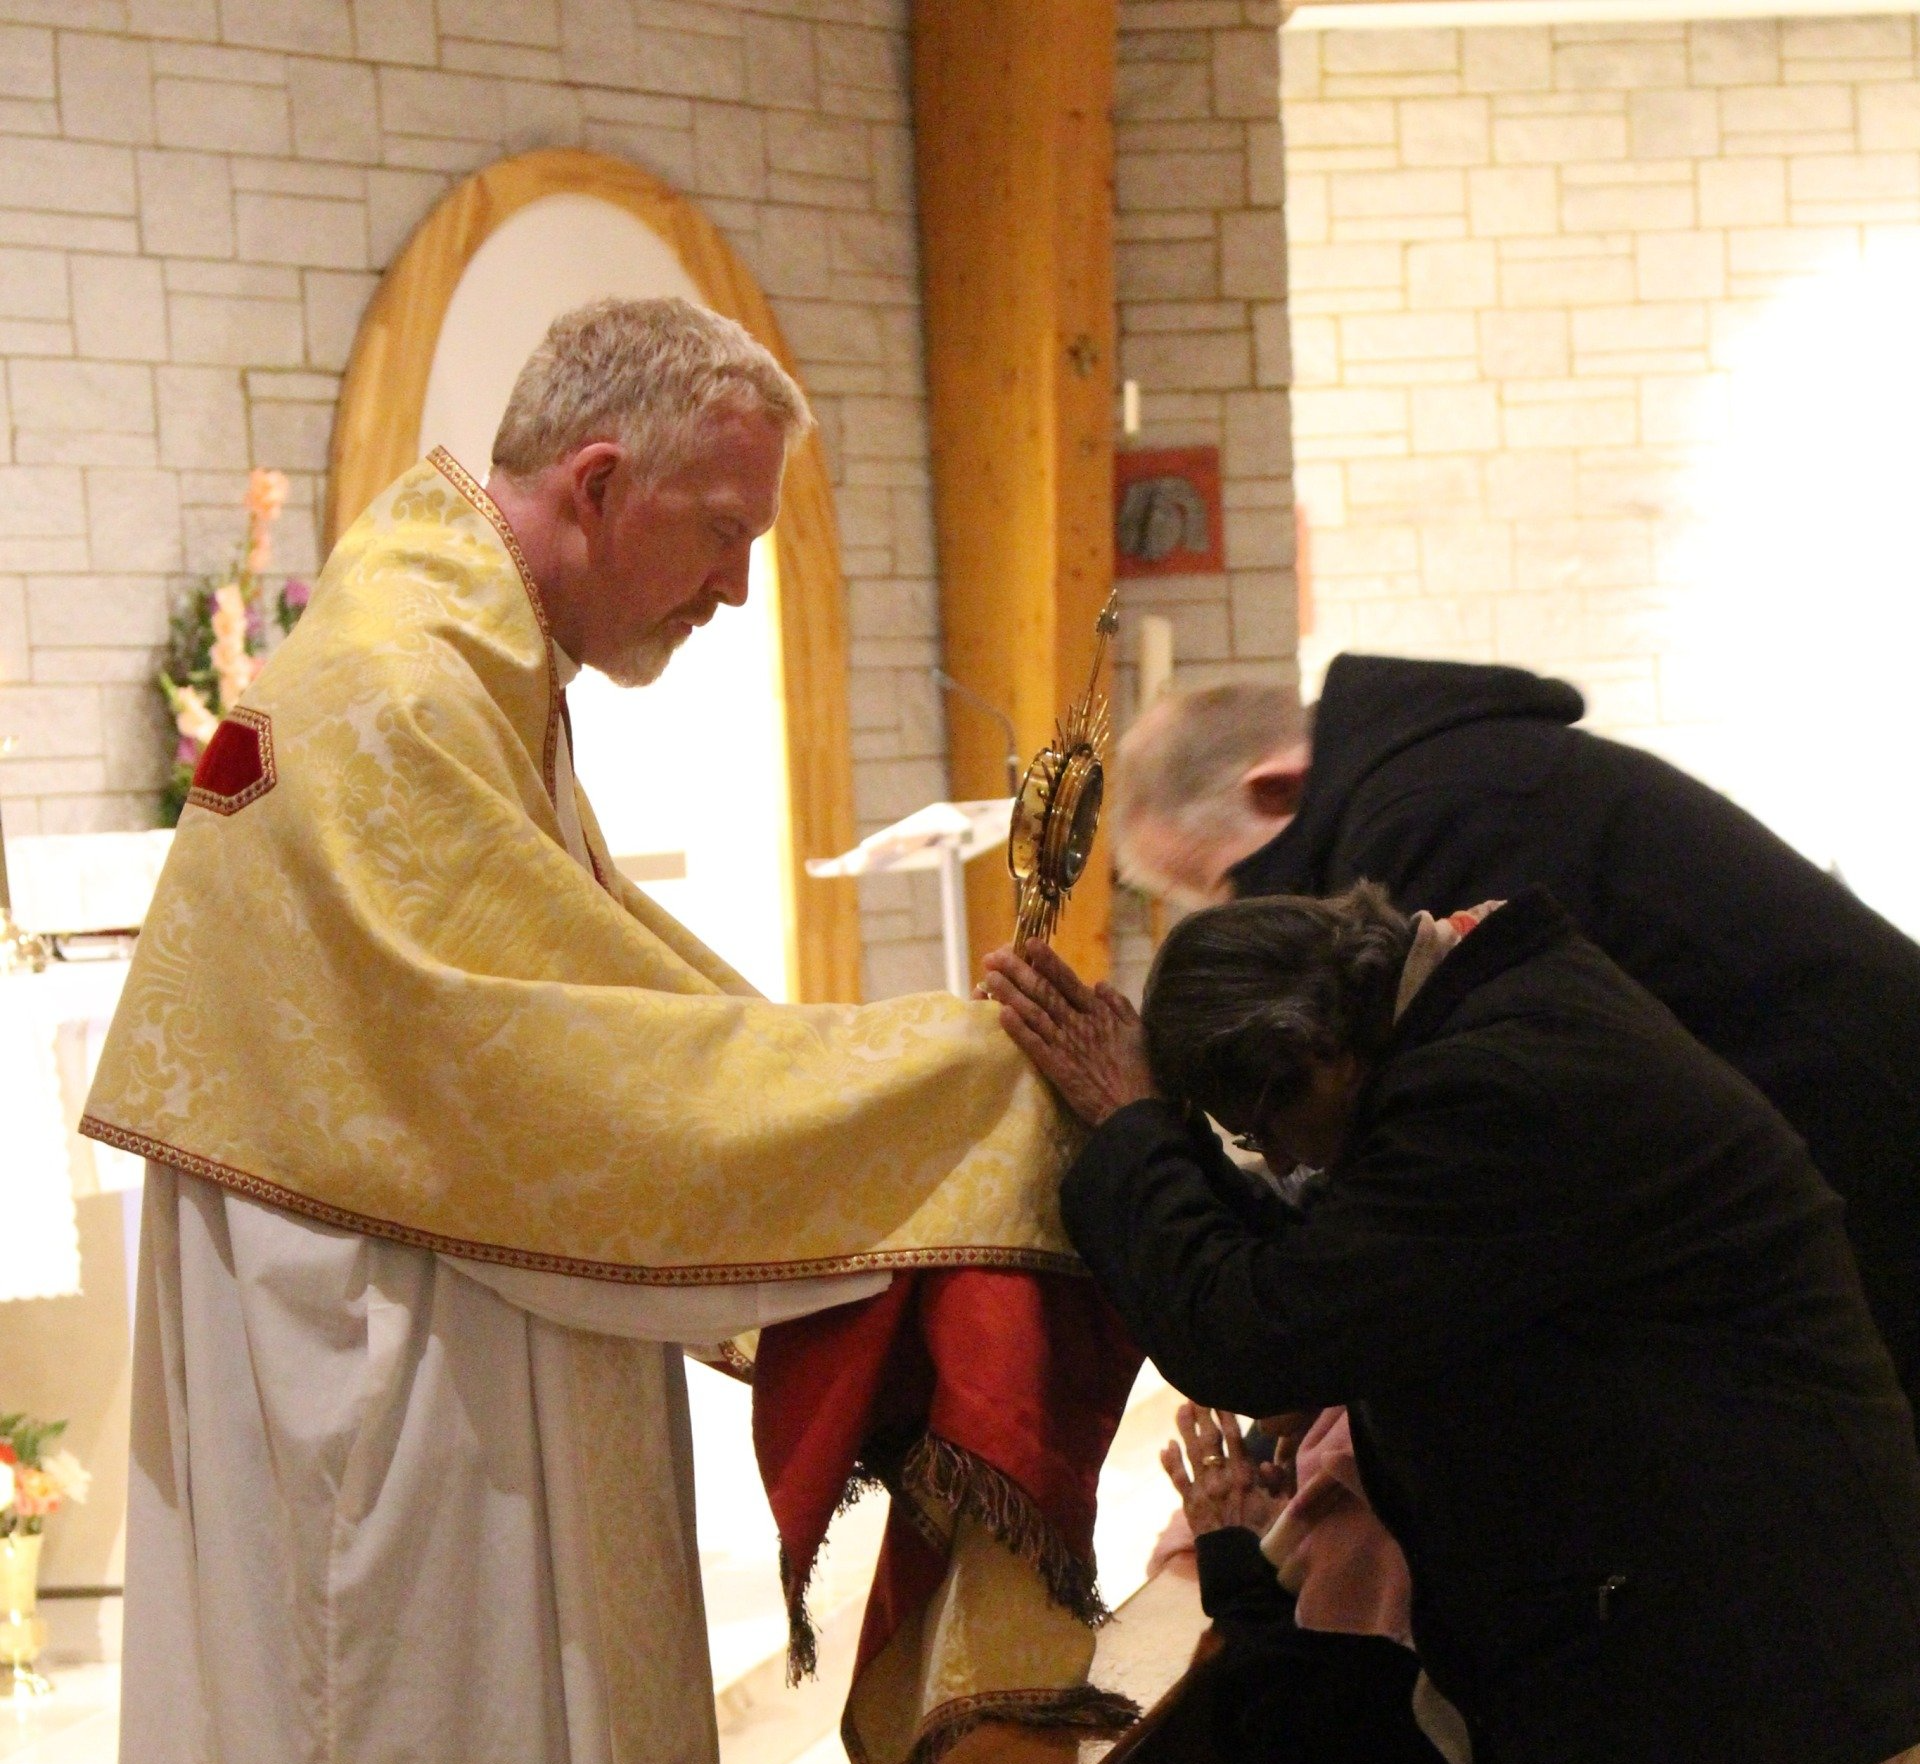 priest in a yellow robe is praying with a woman in a black coat